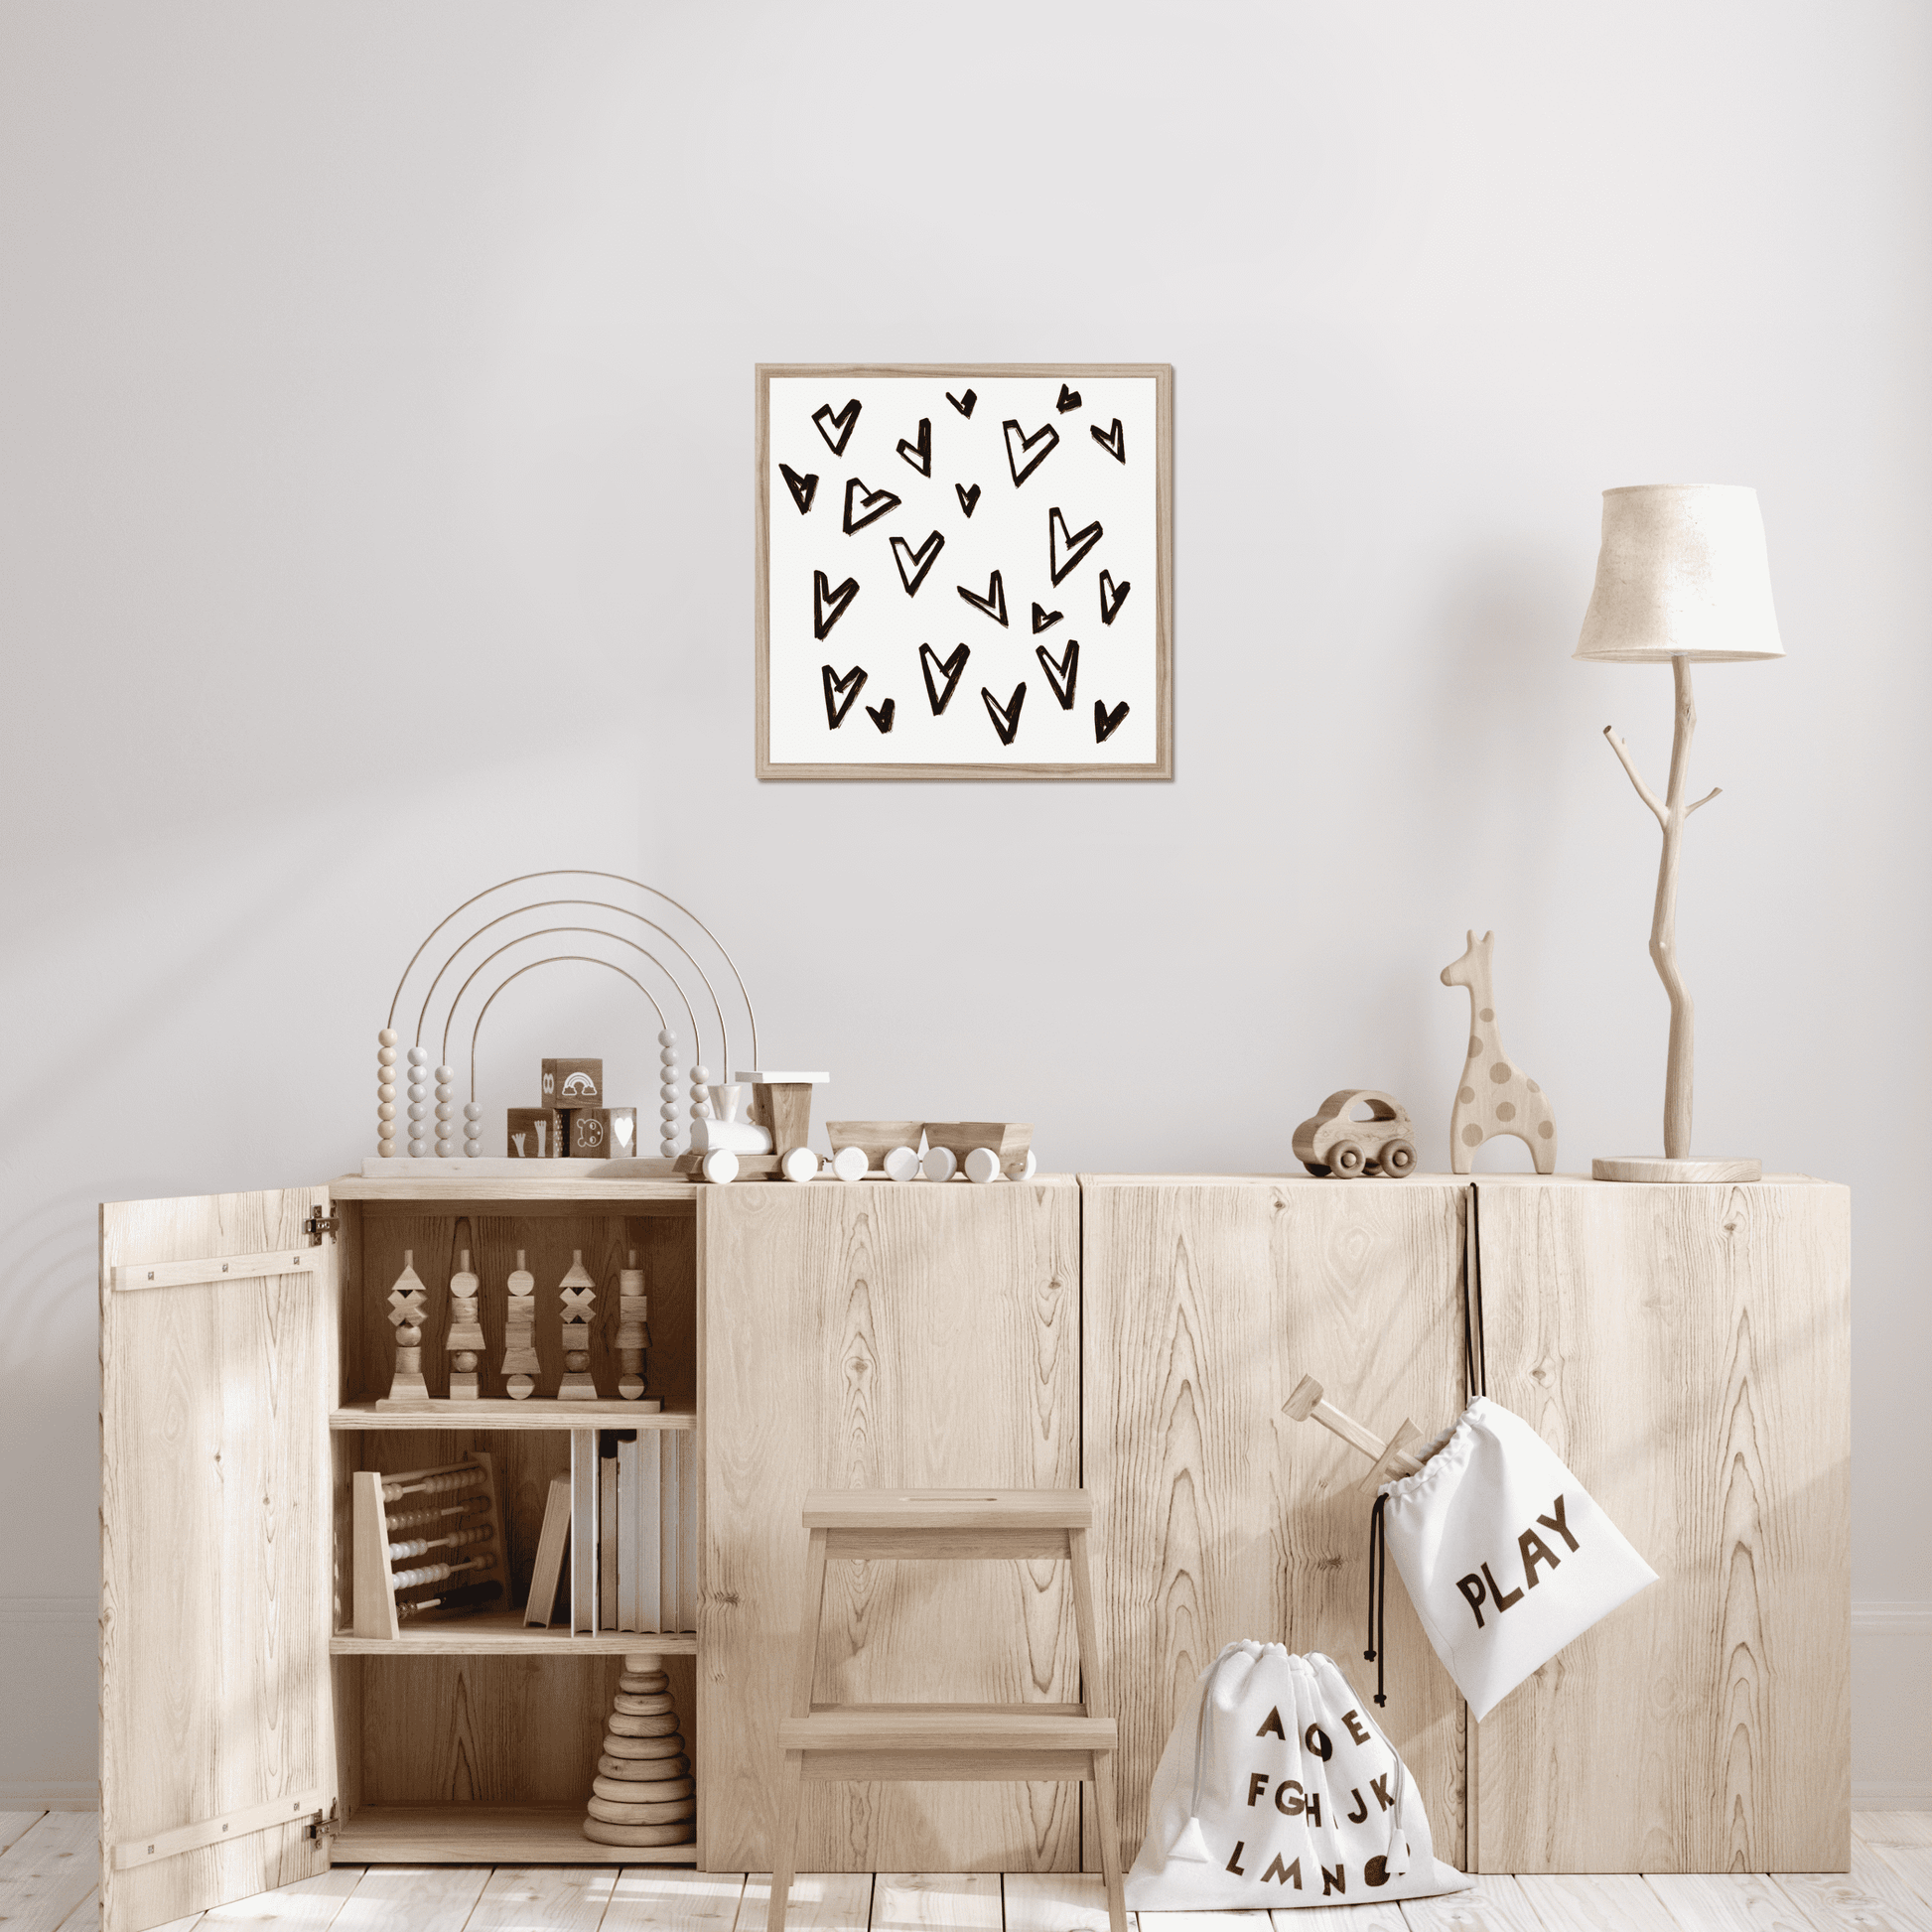 A minimalist style print, bold and simple in black and white. Celebrating a love that is strong and unique, this is great gift for your favourite person.  This is one of our most popular prints. With its bold and quirky design, it fits in perfectly with an eclectic home decor style.